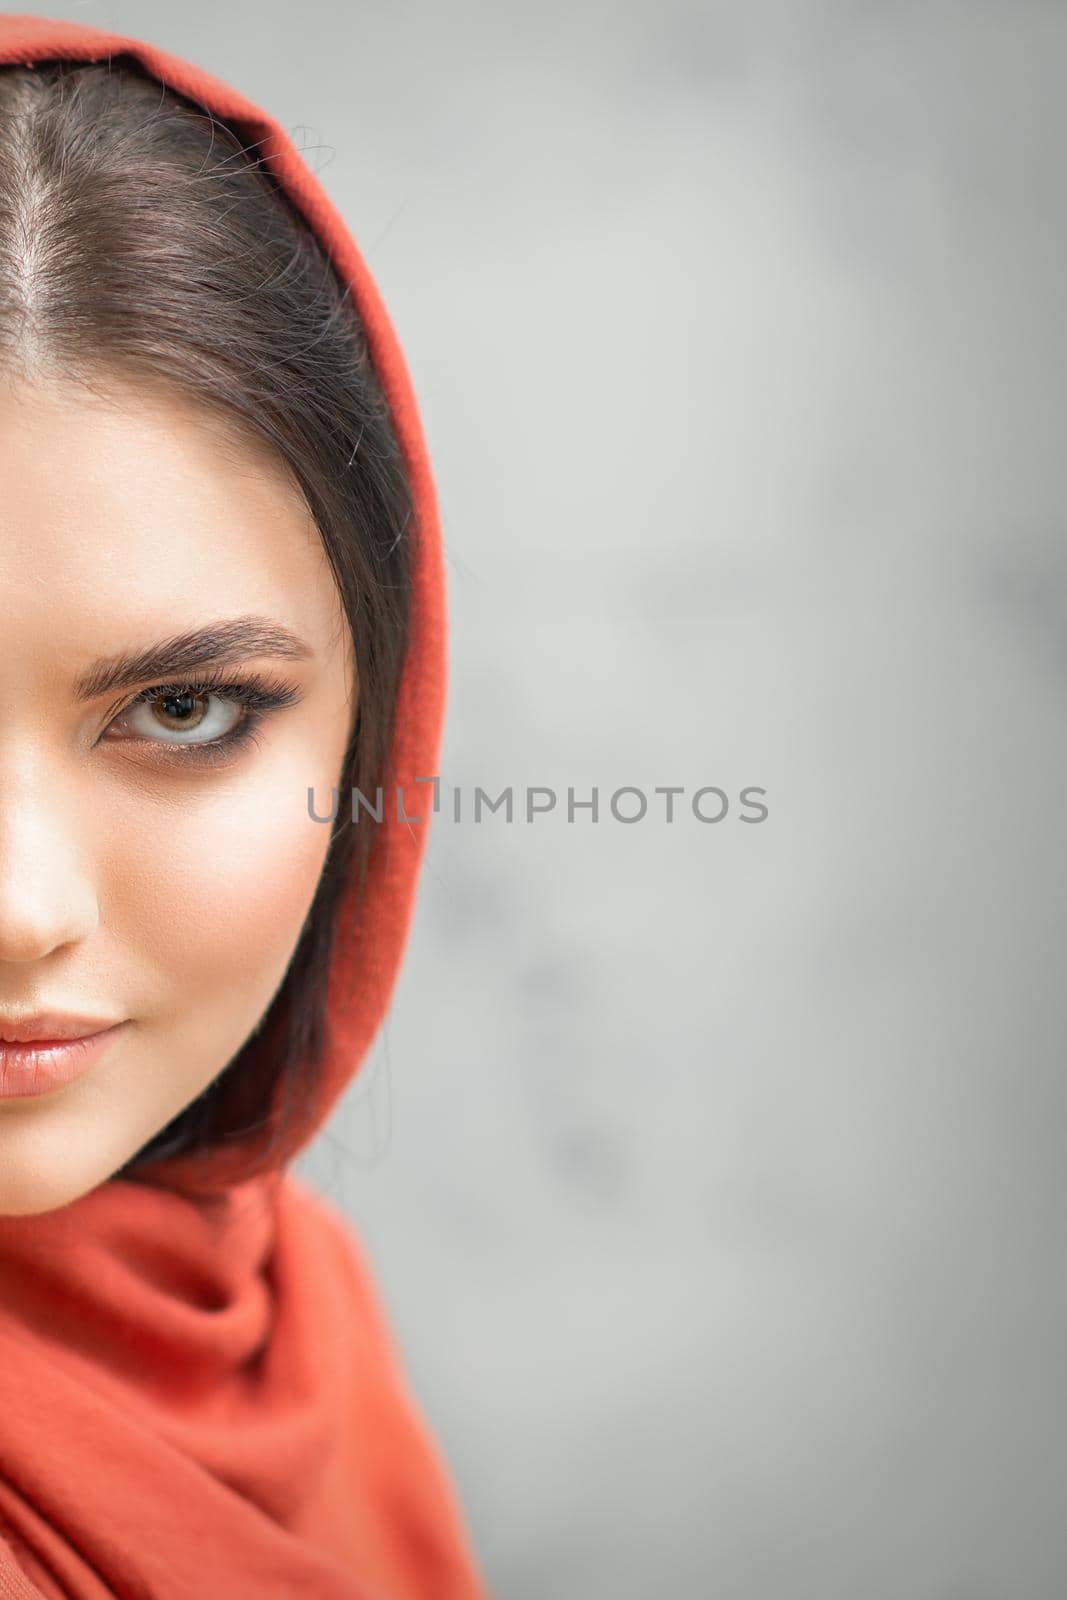 Portrait of a pretty young caucasian woman with makeup in a red headscarf on gray background